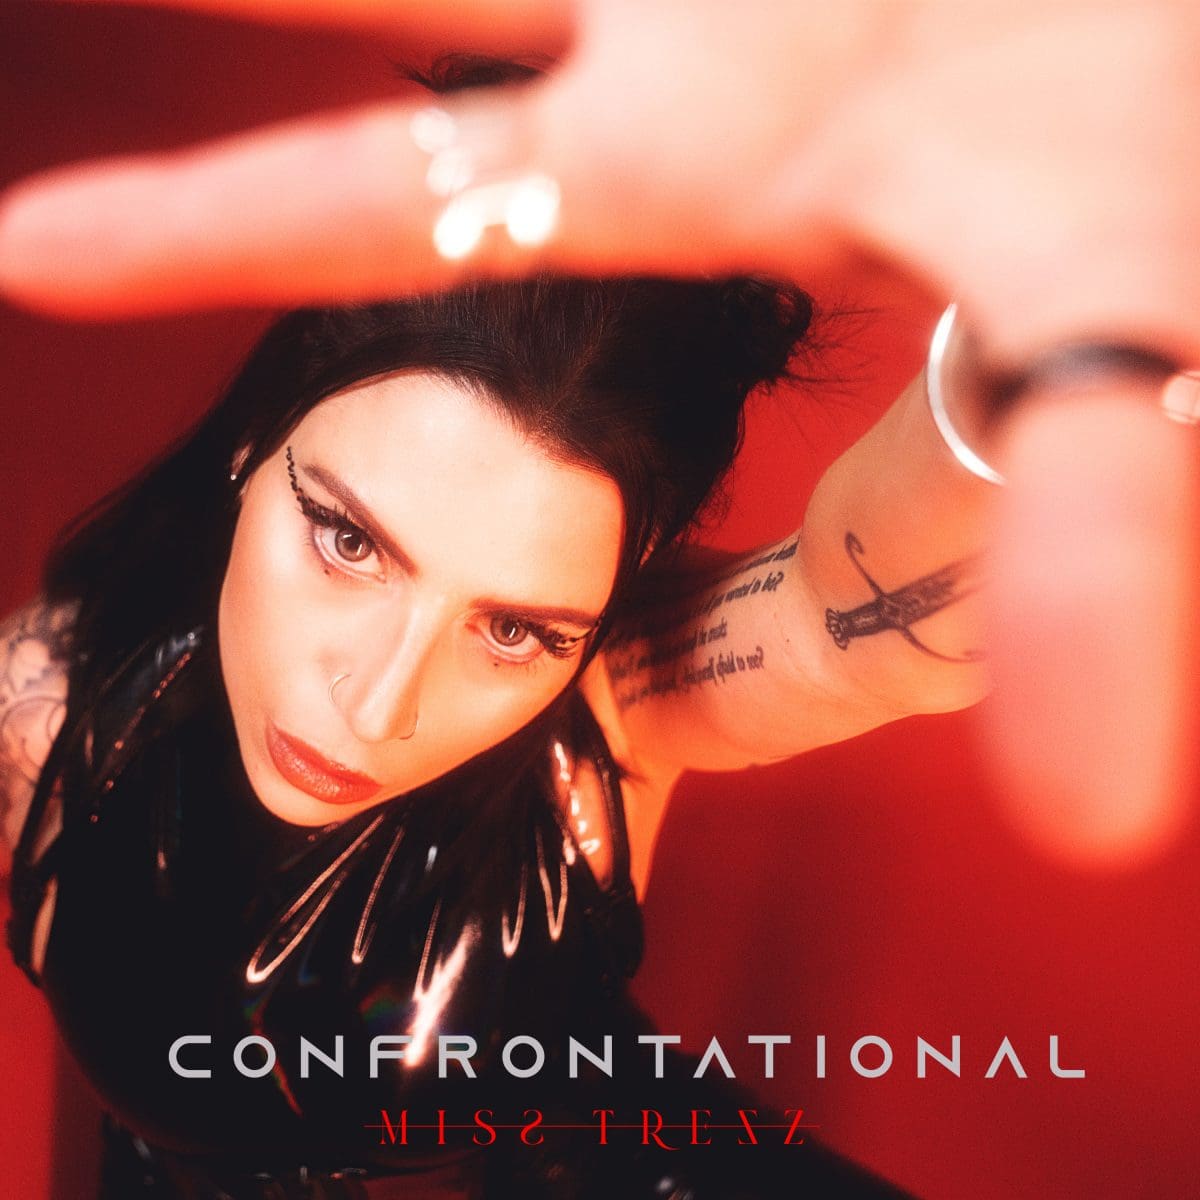 Miss Trezz premieres official music video 'Confrontational' today